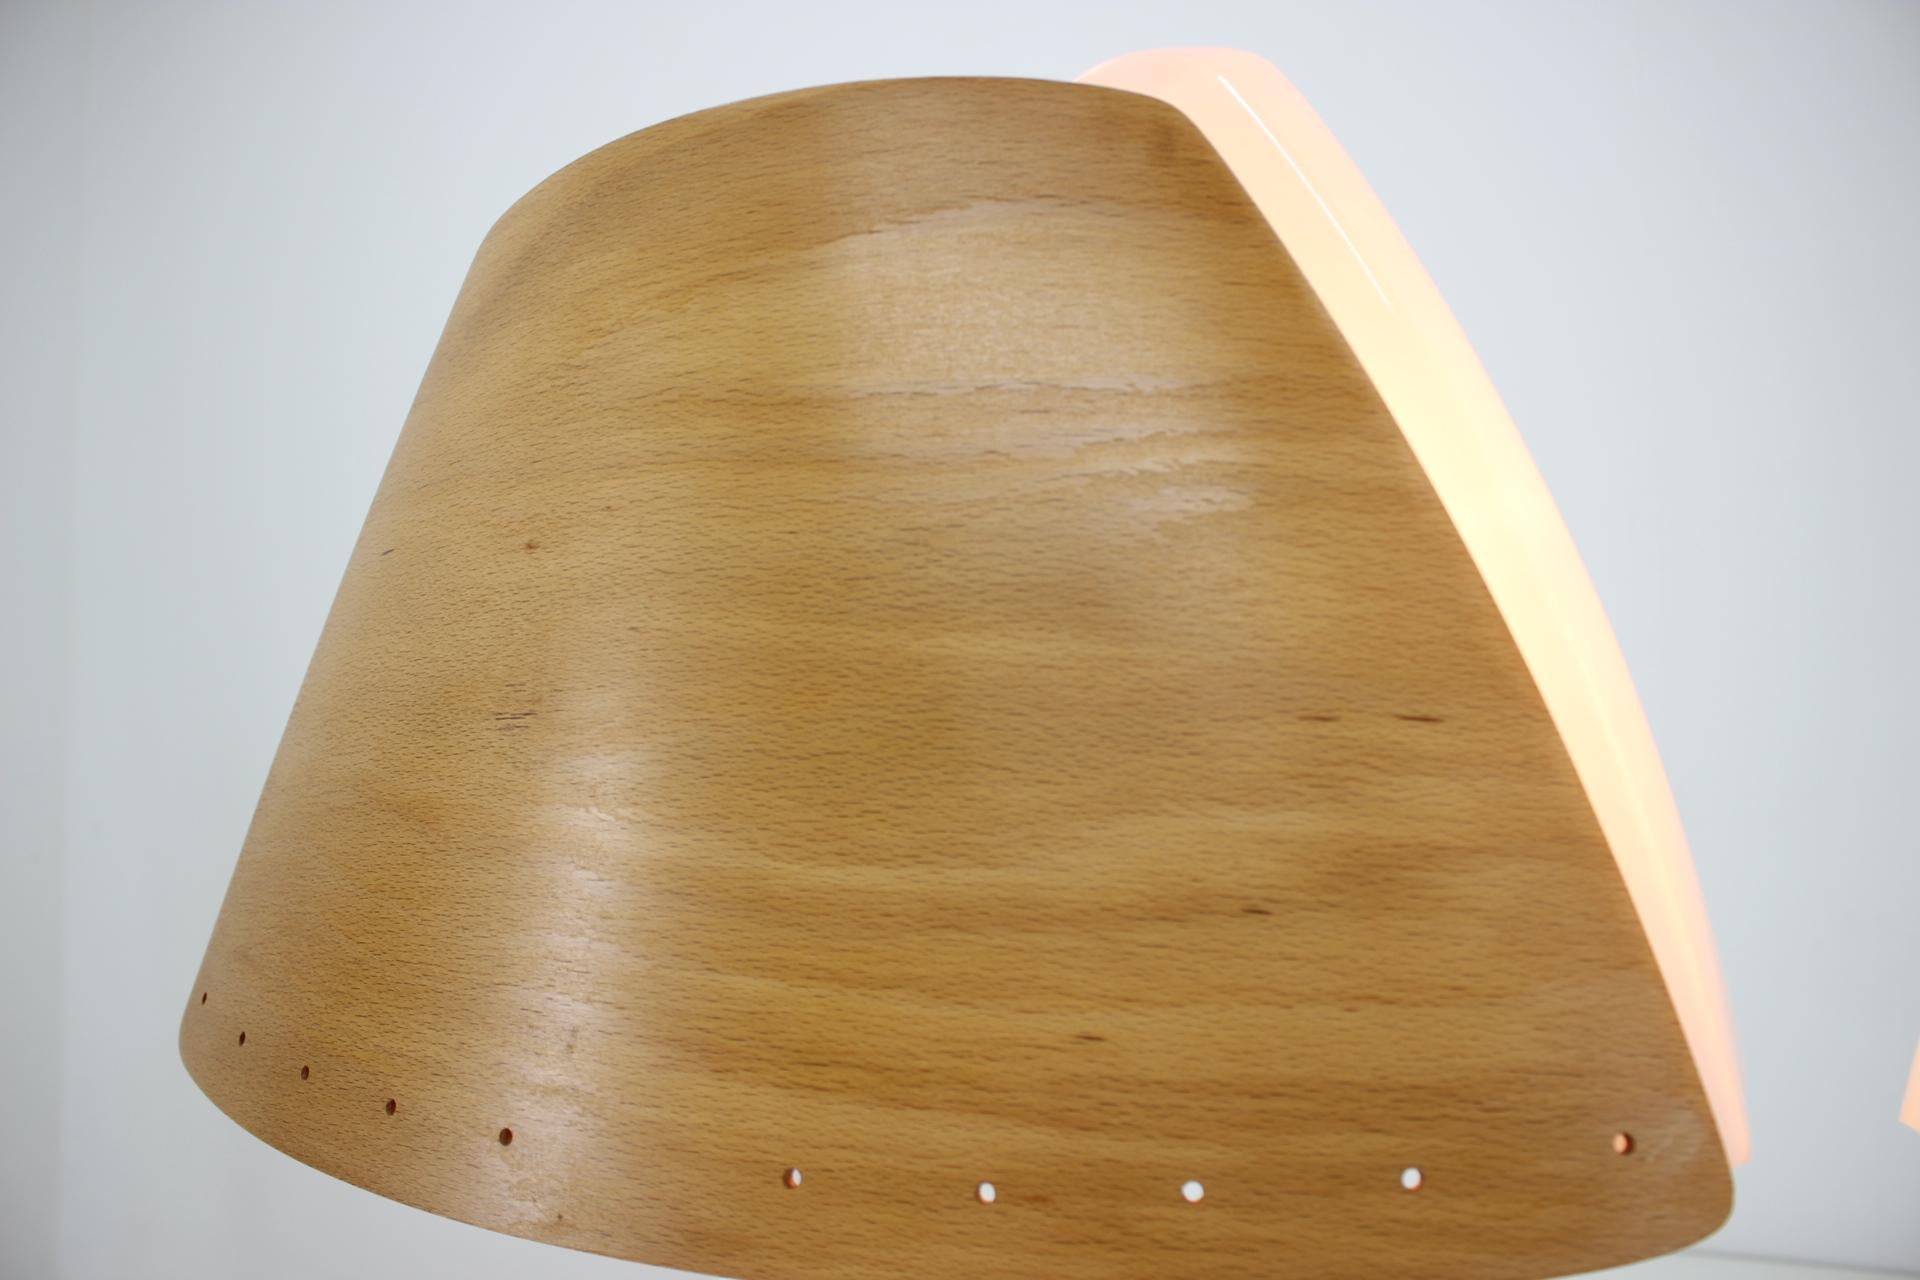 Mid-Century Modern Midcentury French Design Wooden Table Lamp by Lucid, 1970s, Renovated For Sale